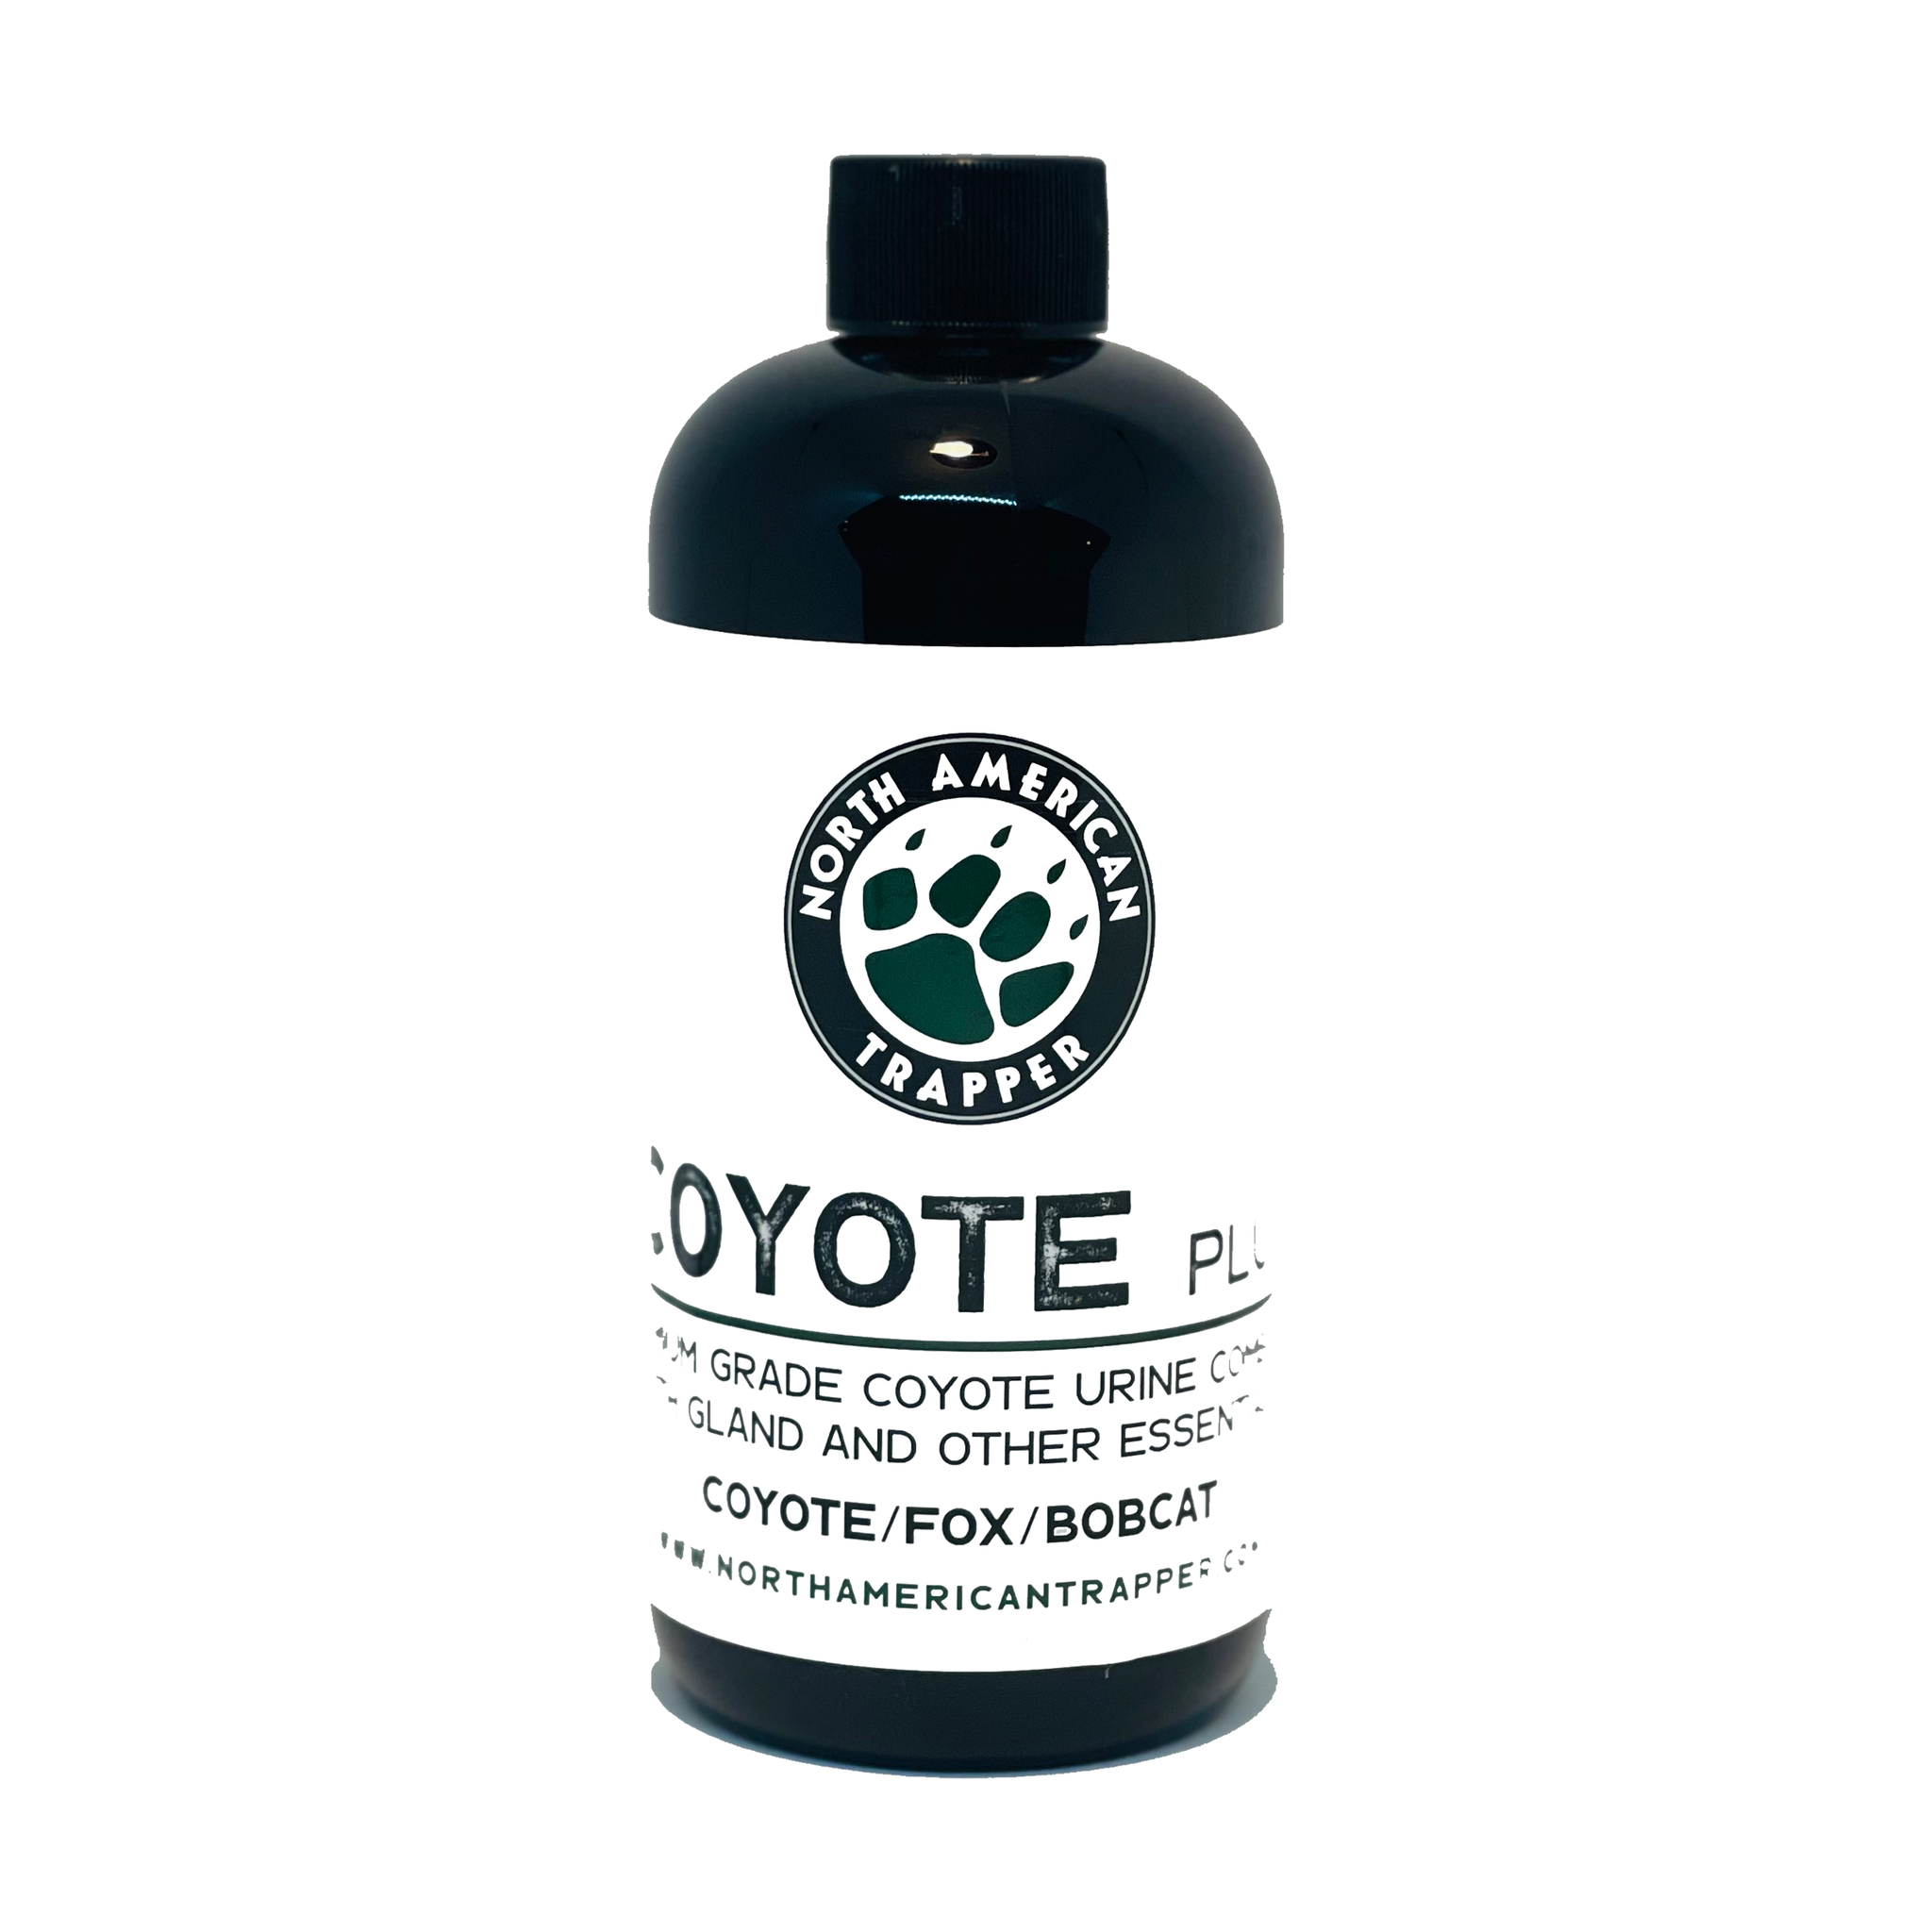 Coyote Trappers Special 4 oz Coyote Super All Call Lure & 4 oz Coyote Urine